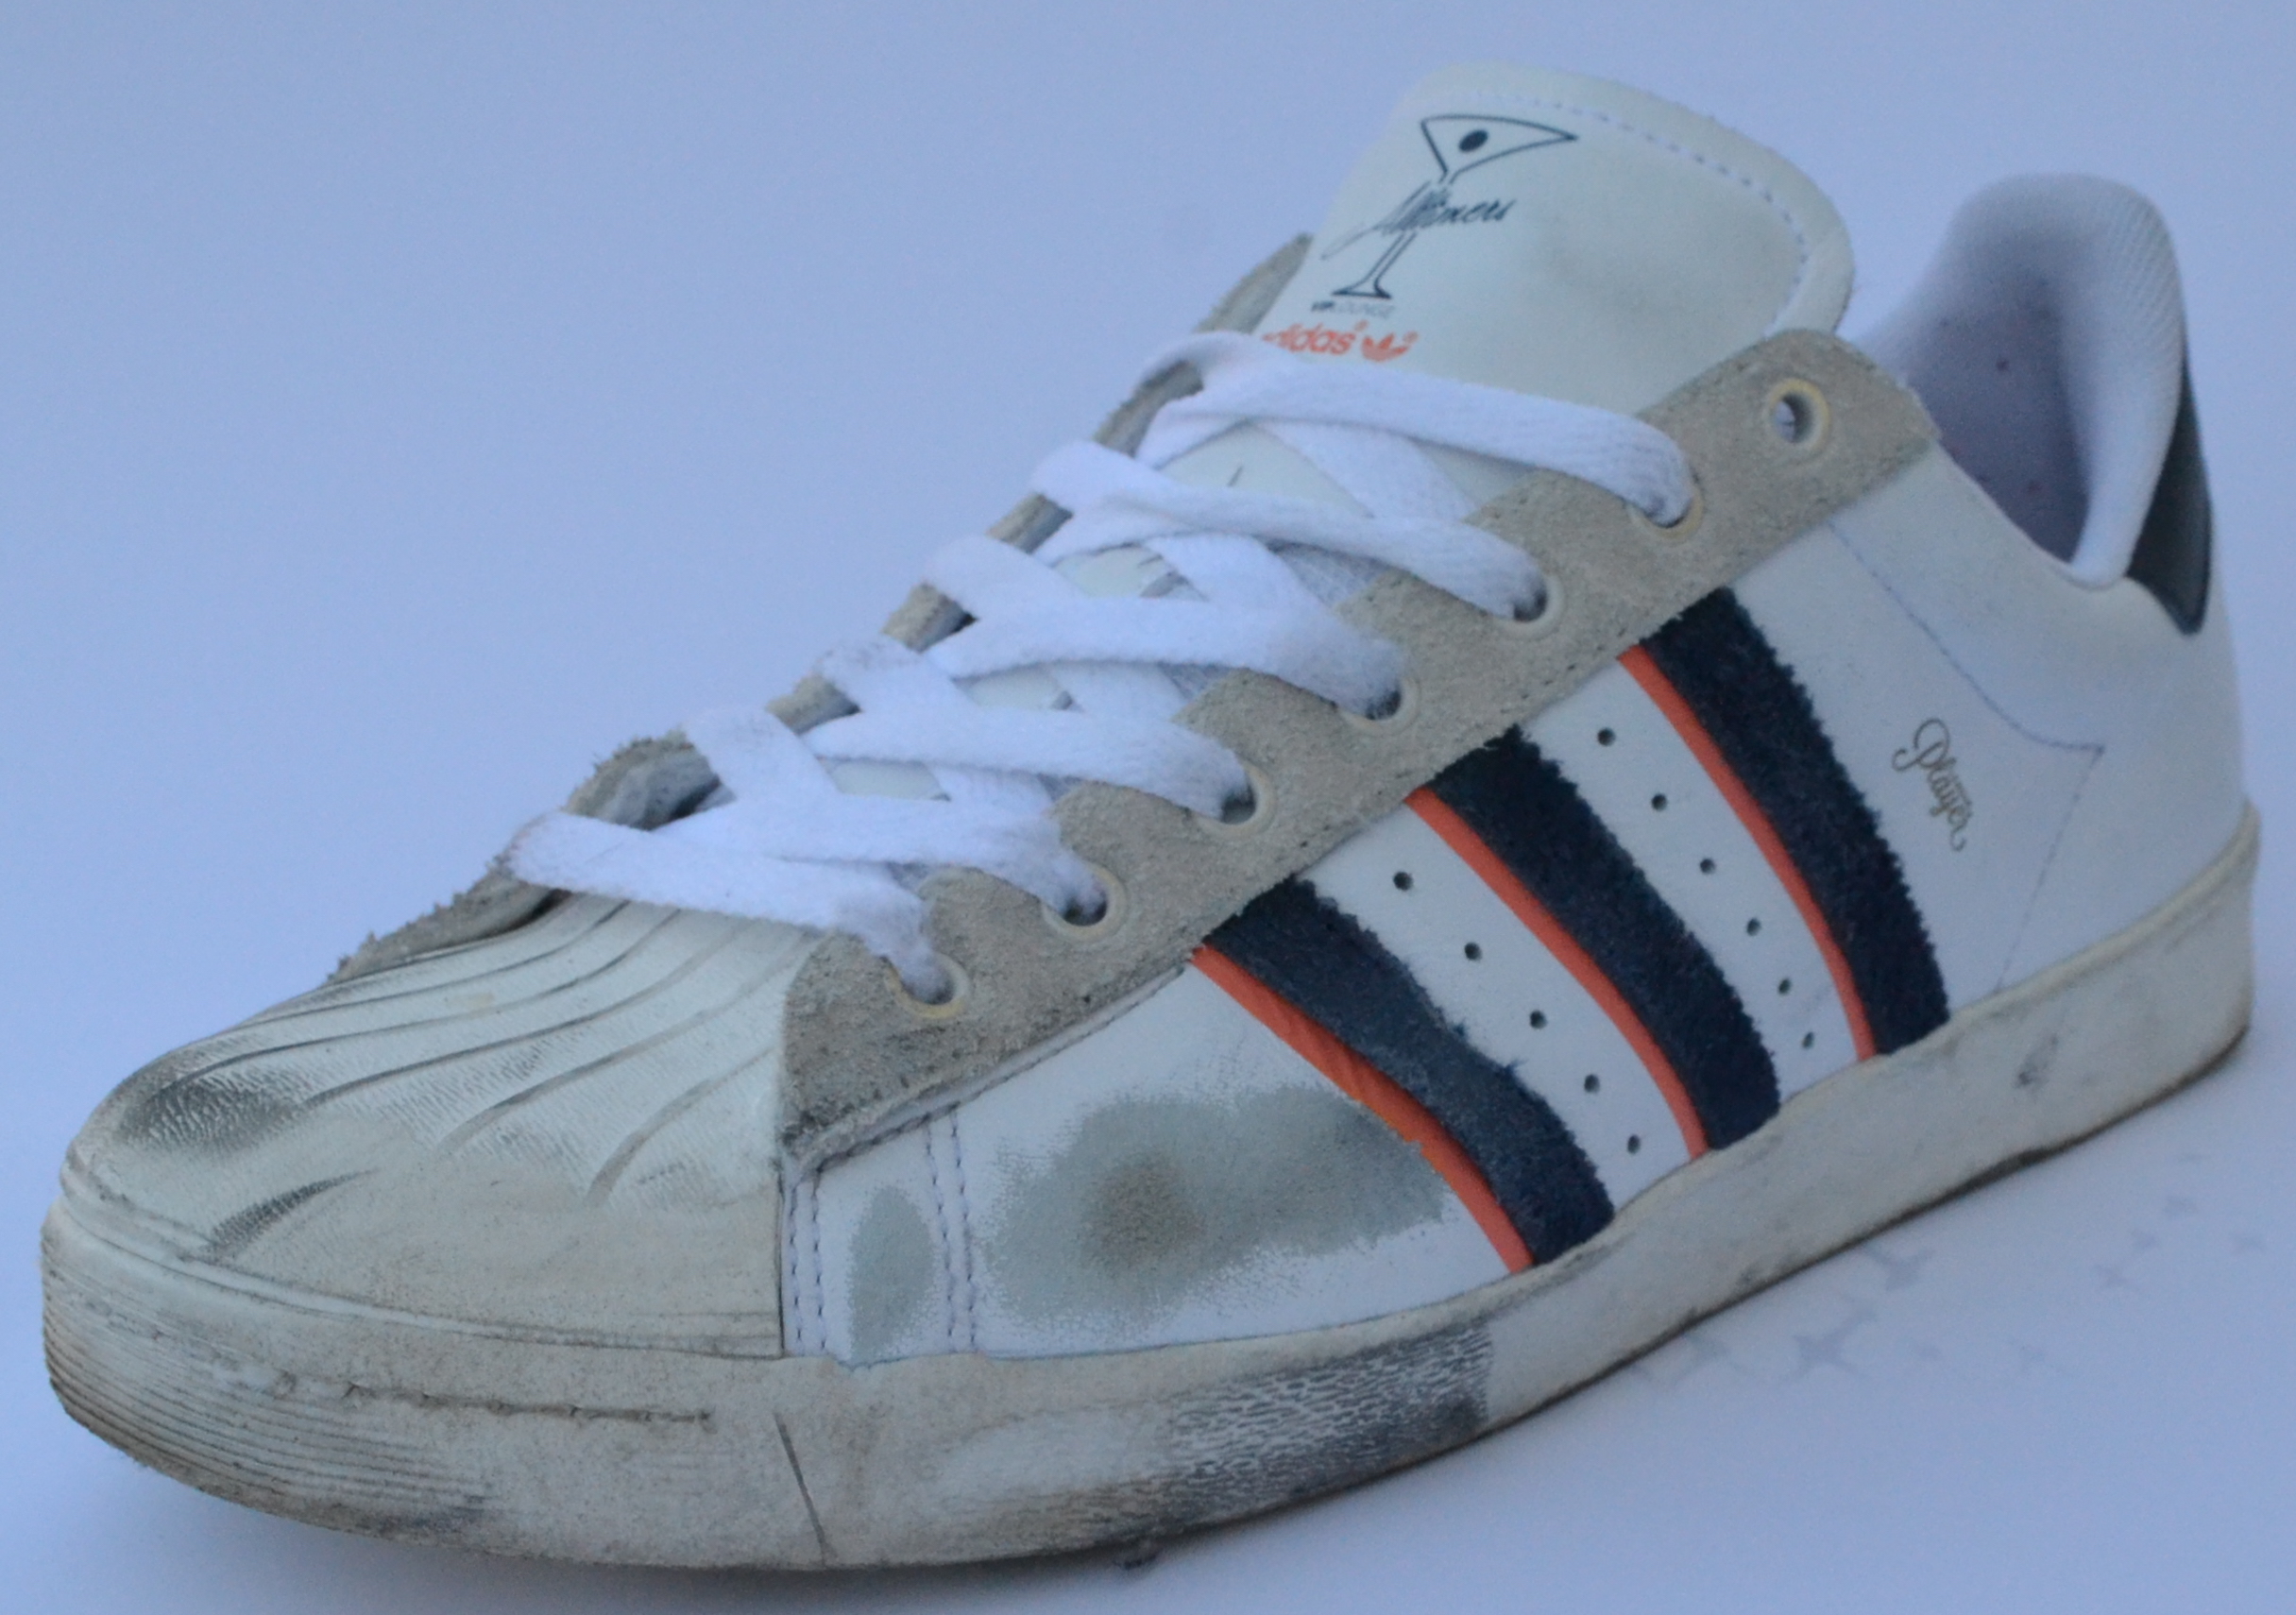 adidas alltimers shoes